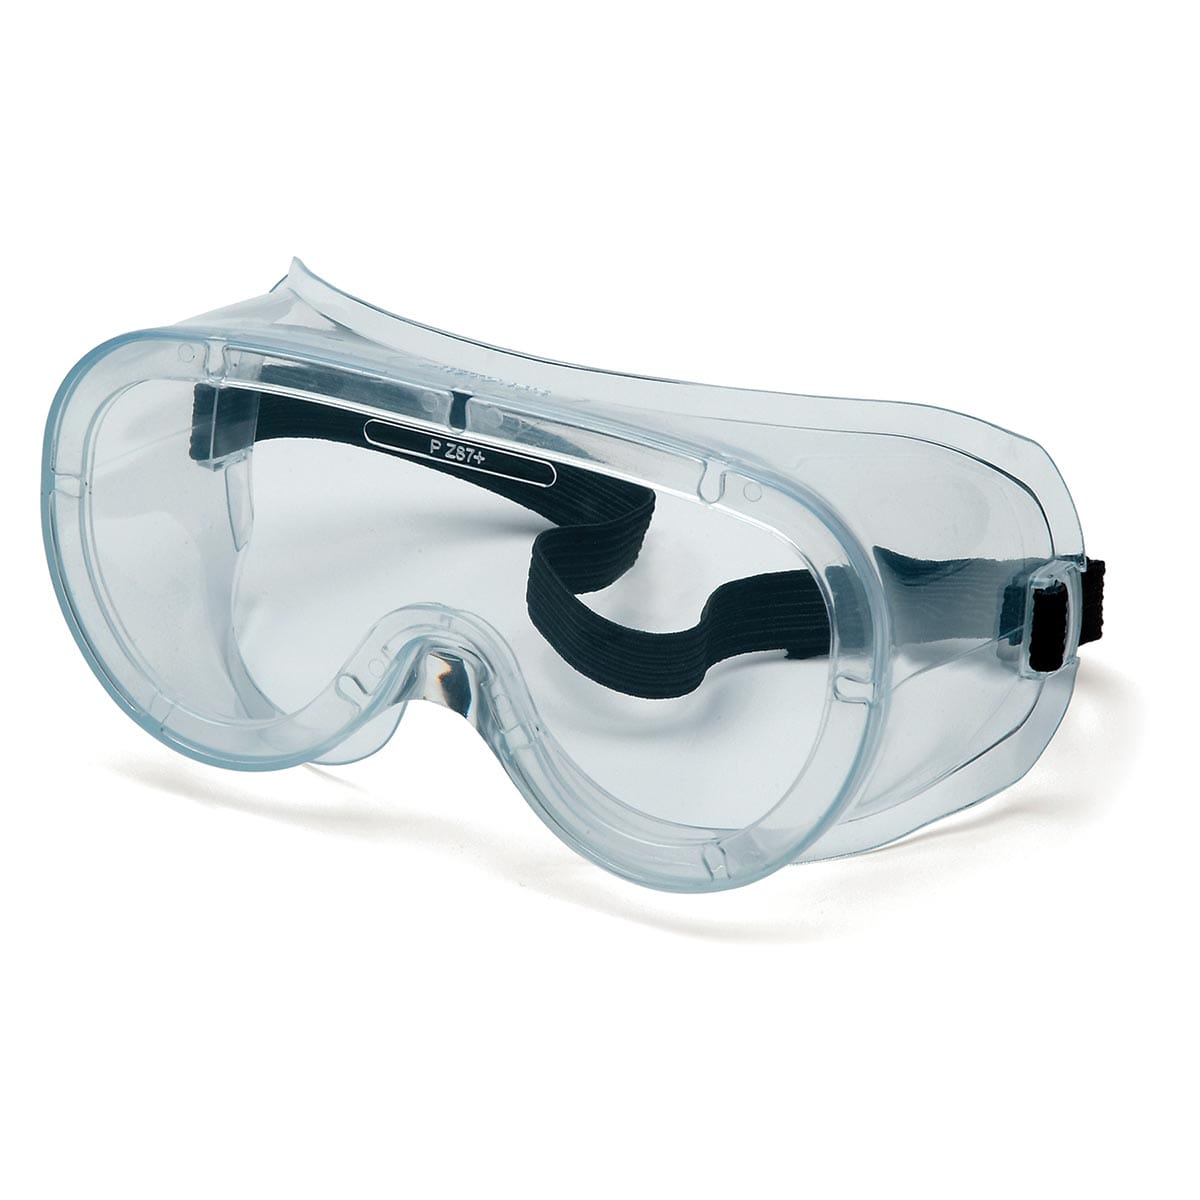 Pyramex Ventless Safety Goggle with H2X Anti-Fog